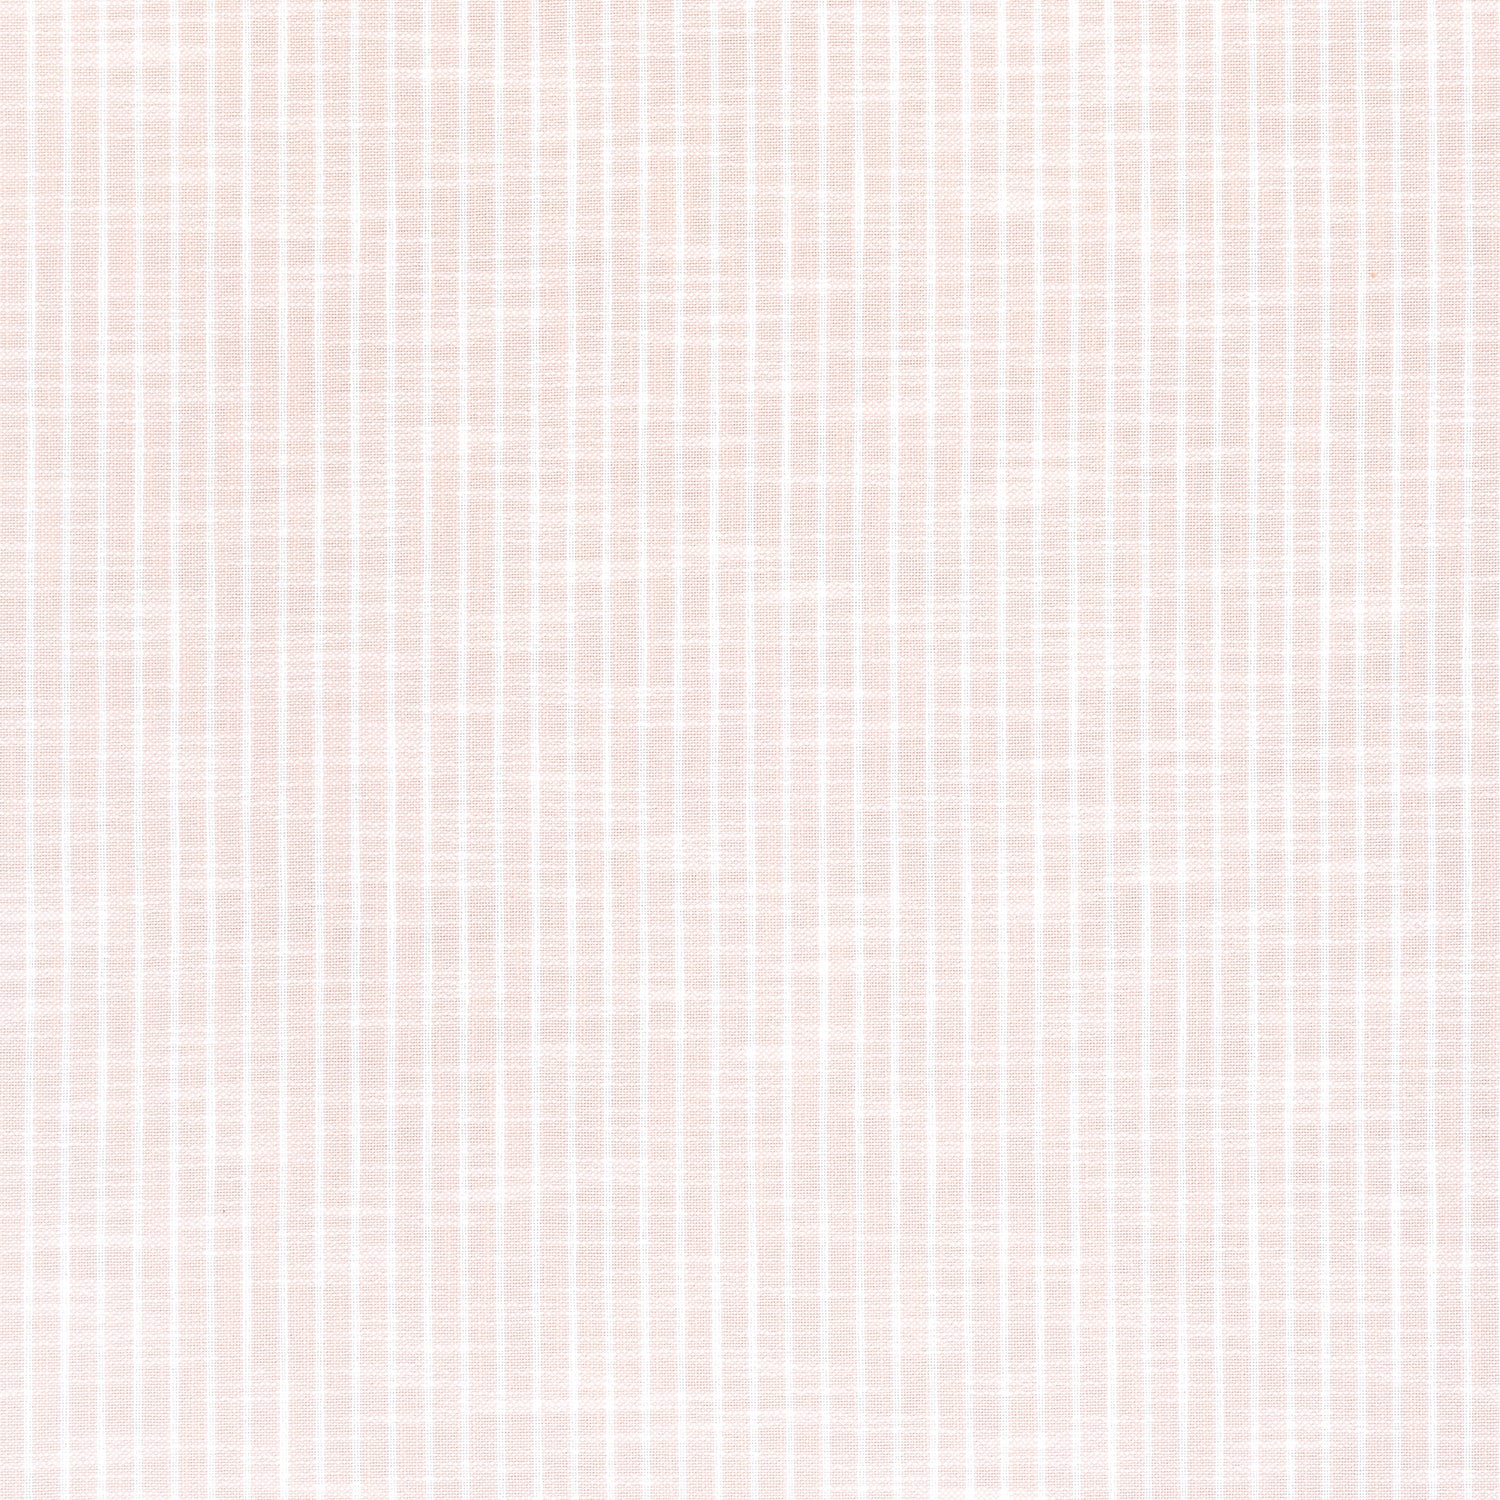 Bayside Stripe fabric in blush color - pattern number W73469 - by Thibaut in the Landmark collection